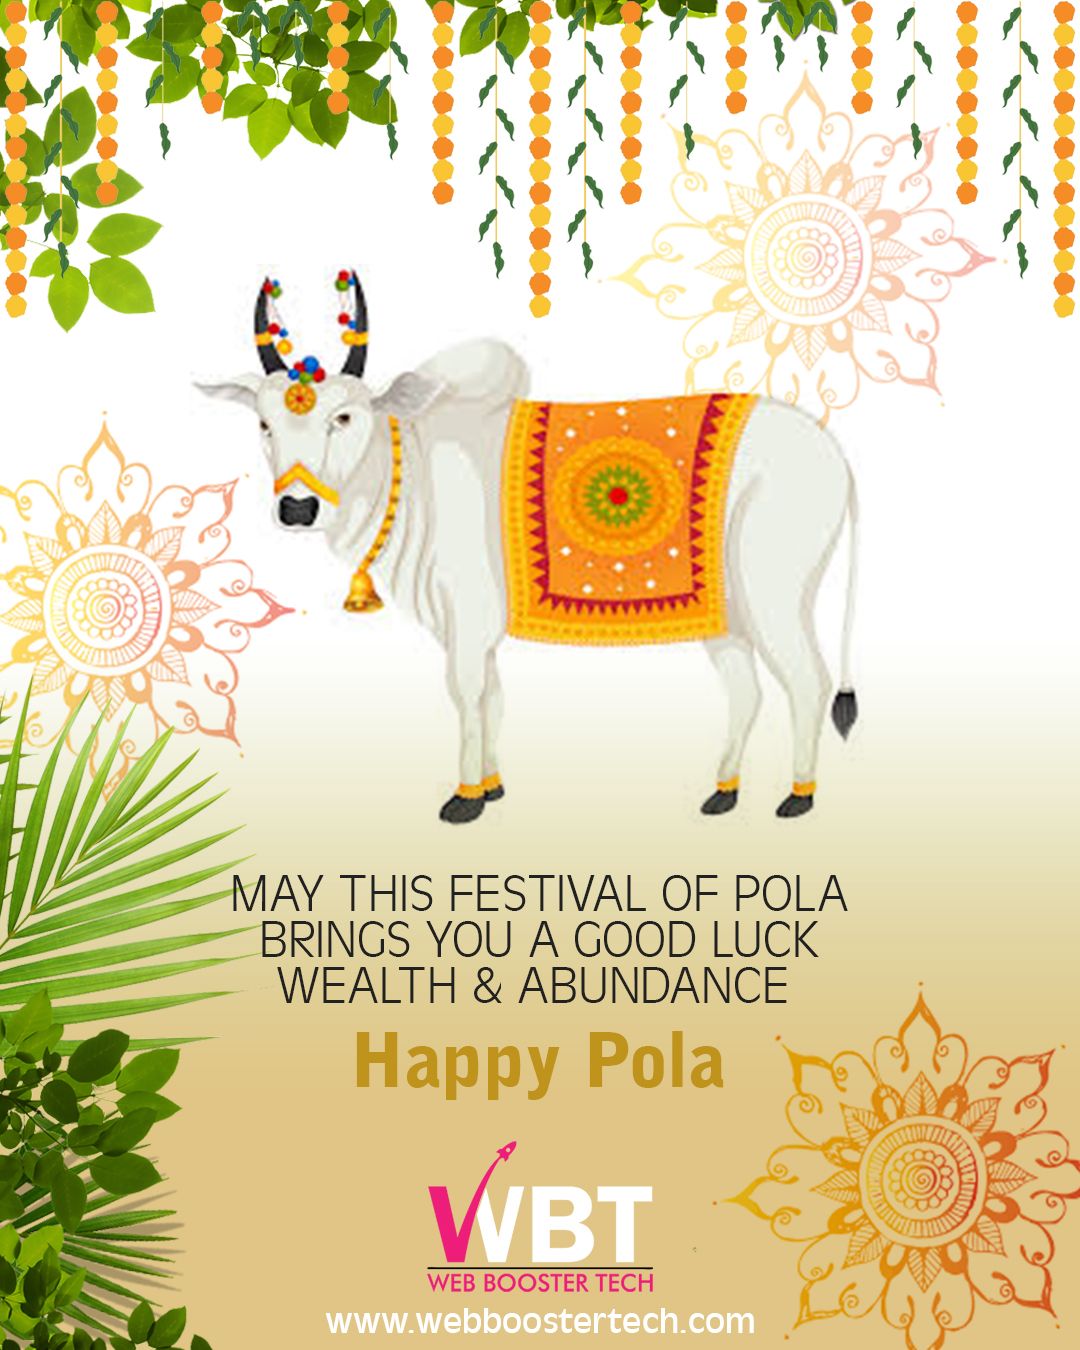 HAPPY POLA from WBT